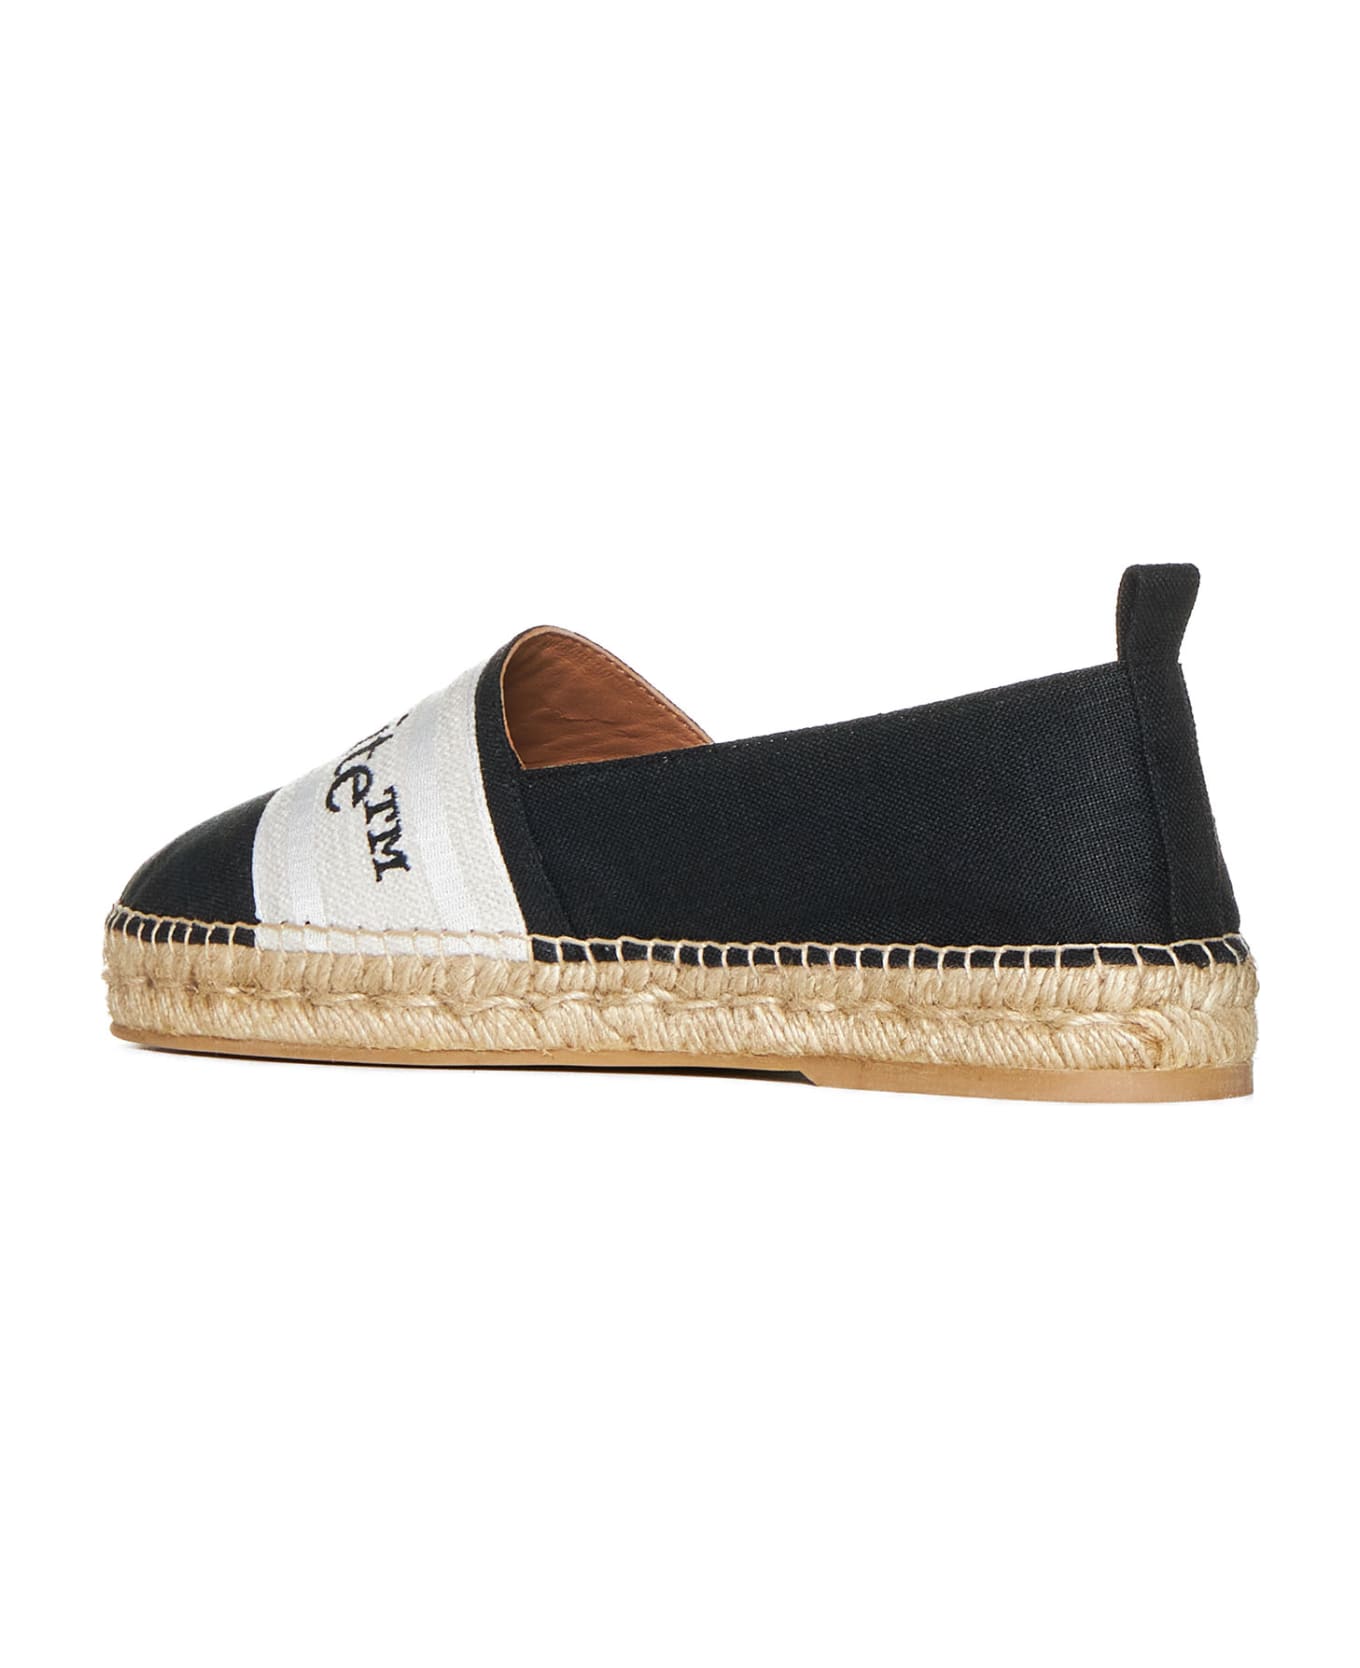 Off-White Flat Shoes - Black